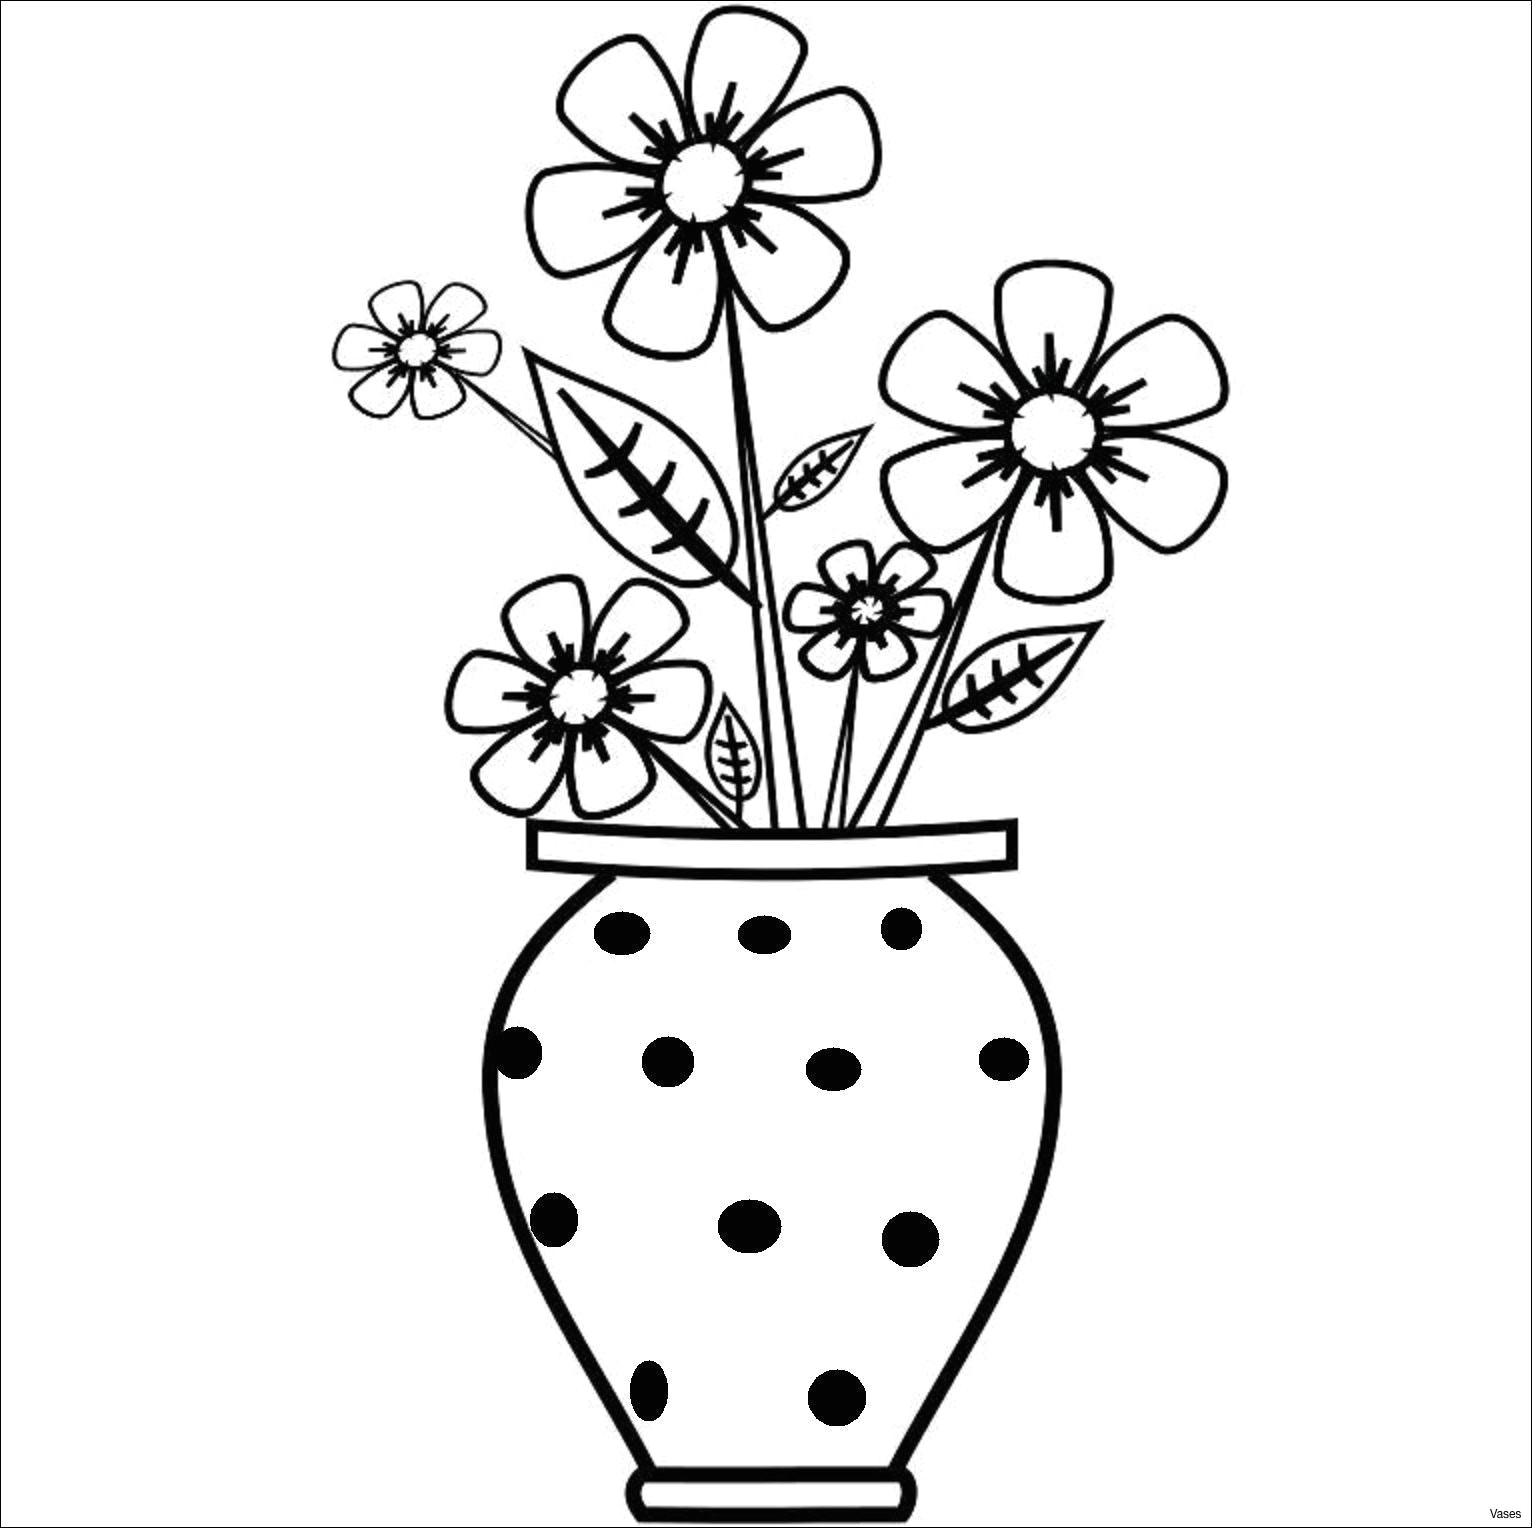 Drawing Of Flower Pot Images Pics Of Drawings Easy Vase Art Drawings How to Draw A Vase Step 2h